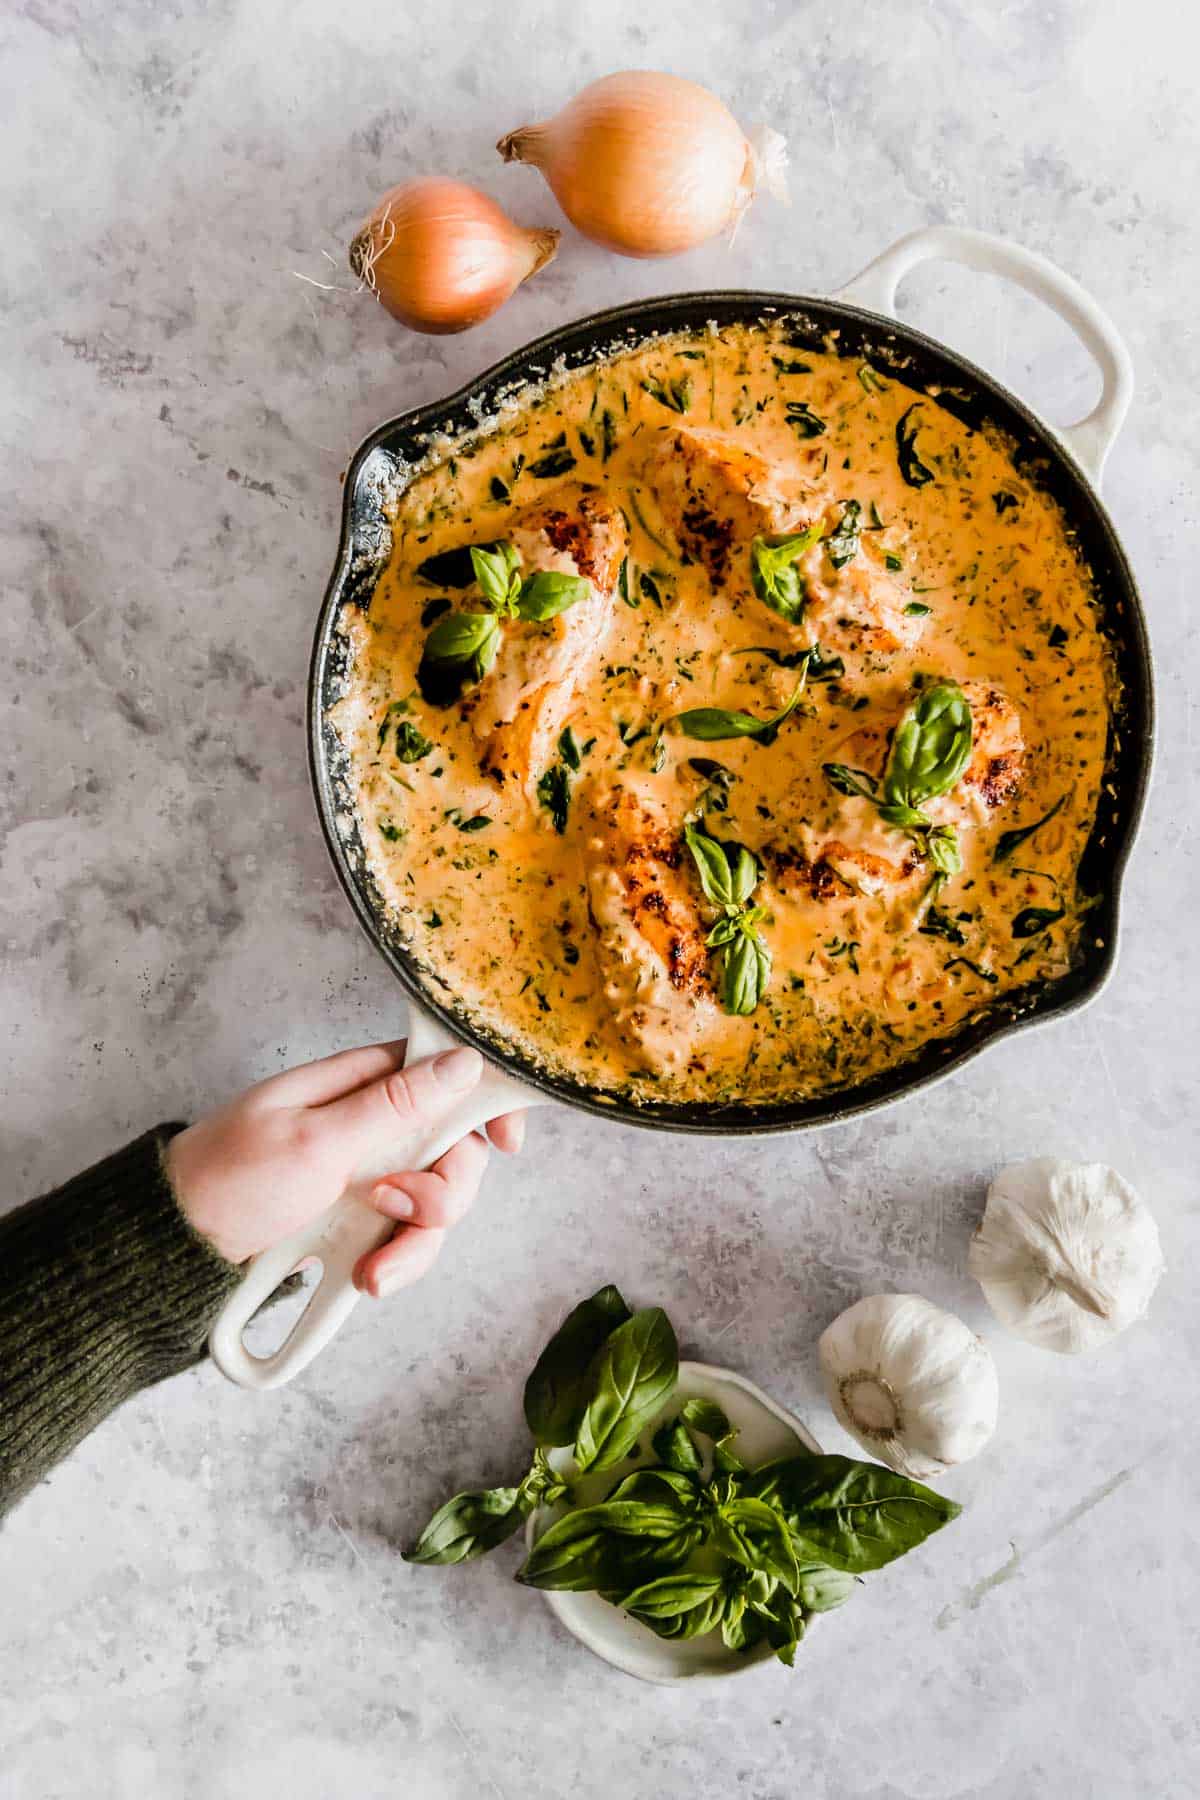 A person's hand holding a skillet containing creamy tuscan chicken with fresh basil on top, surrounded by raw garlic and onions on a marble surface.